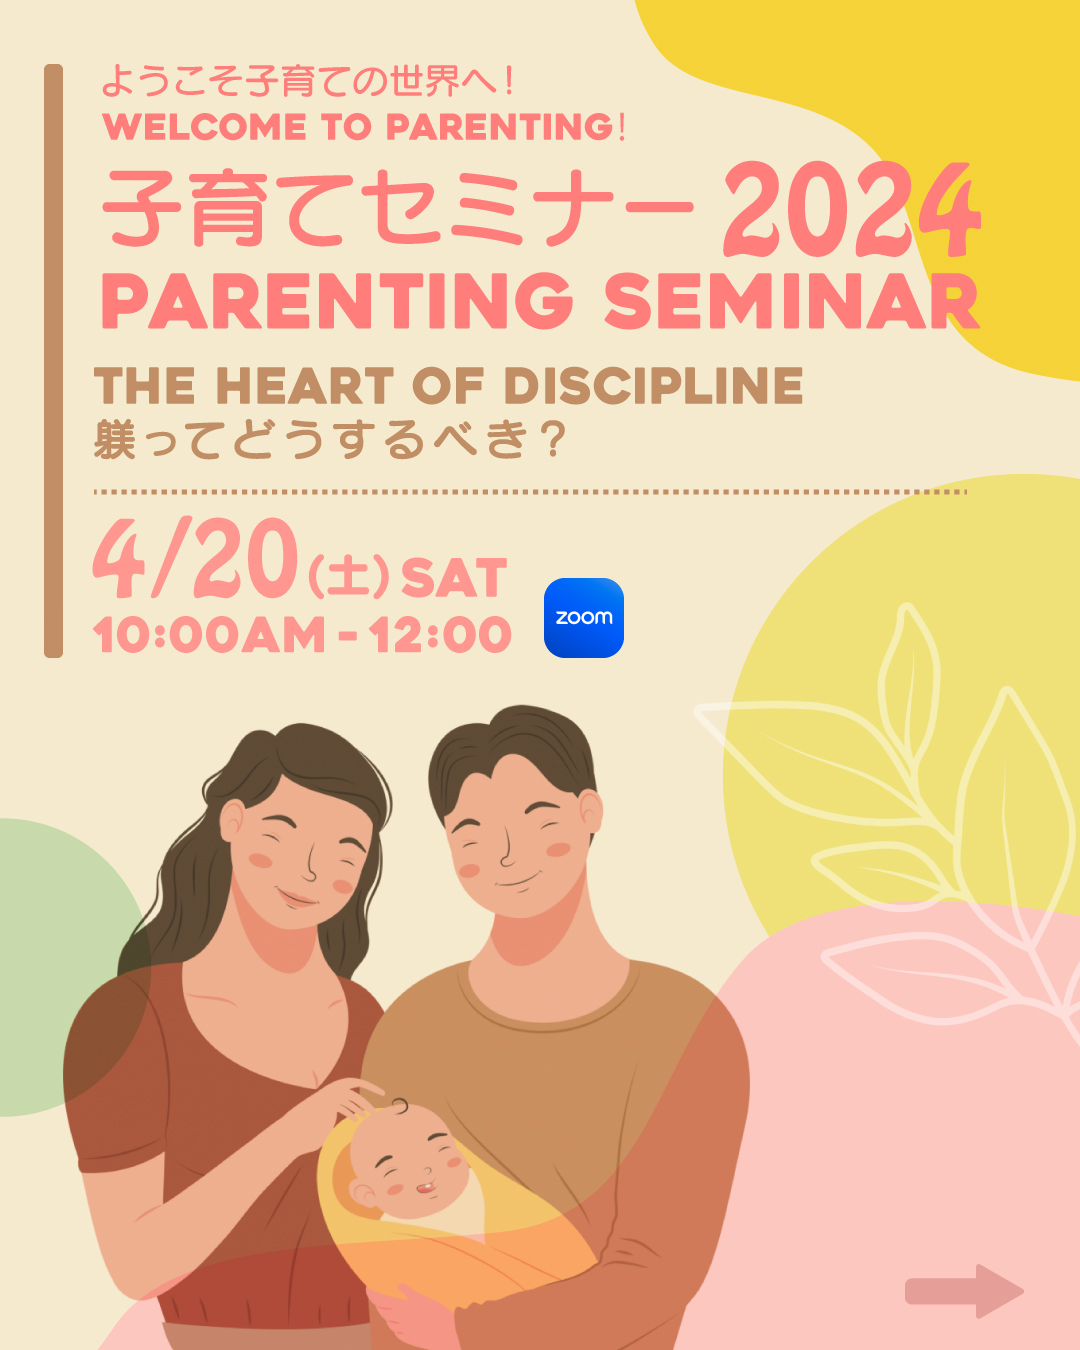 Featured image for “ZOOM PARENTING SEMINAR 4/20”